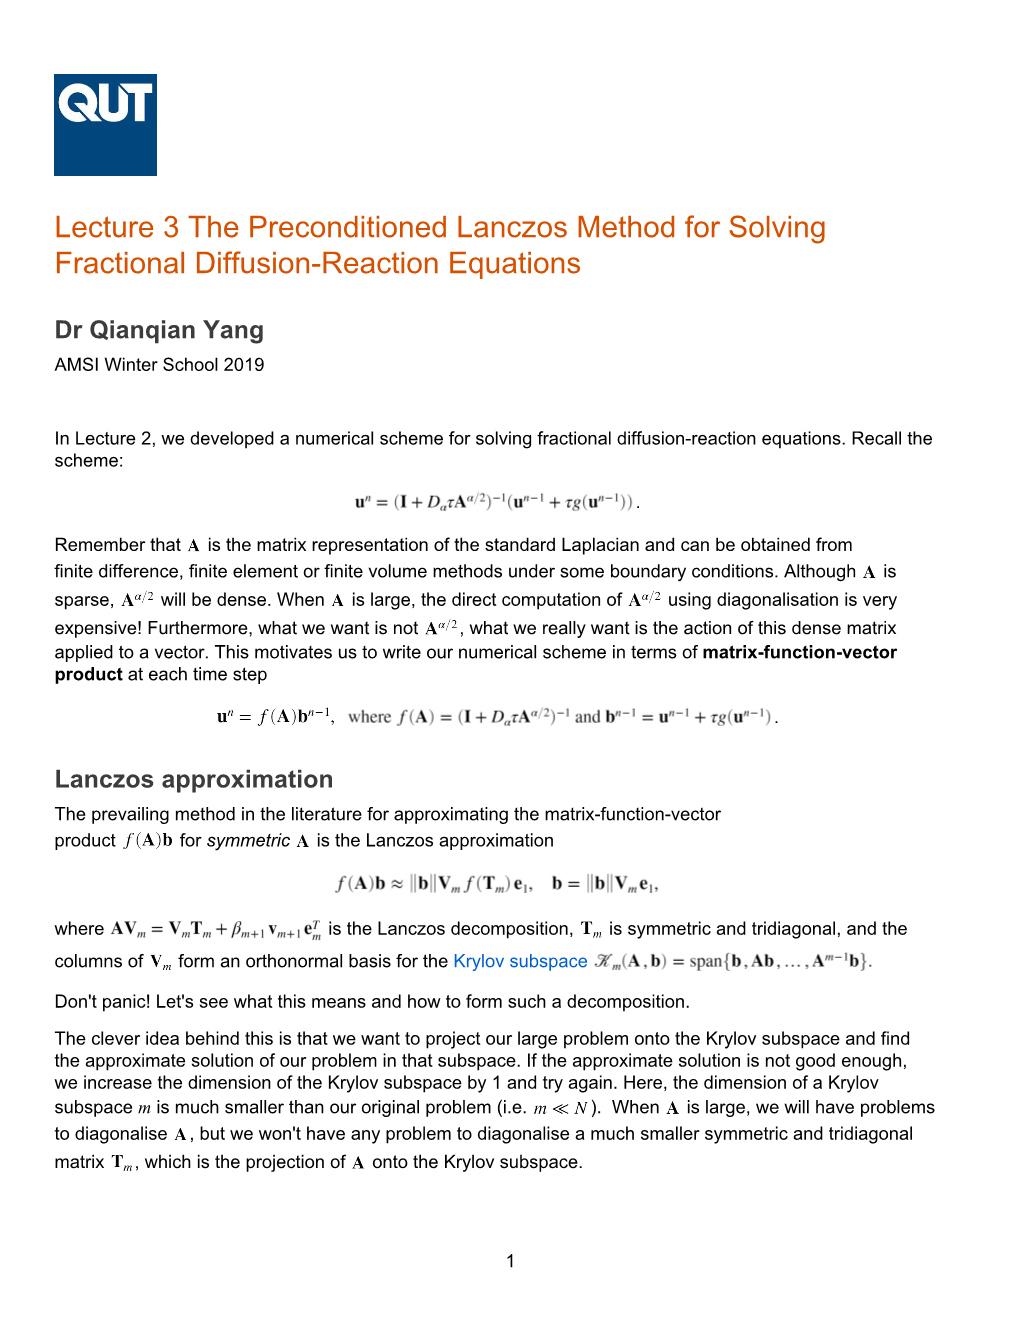 Lecture 3 the Preconditioned Lanczos Method for Solving Fractional Diffusion-Reaction Equations